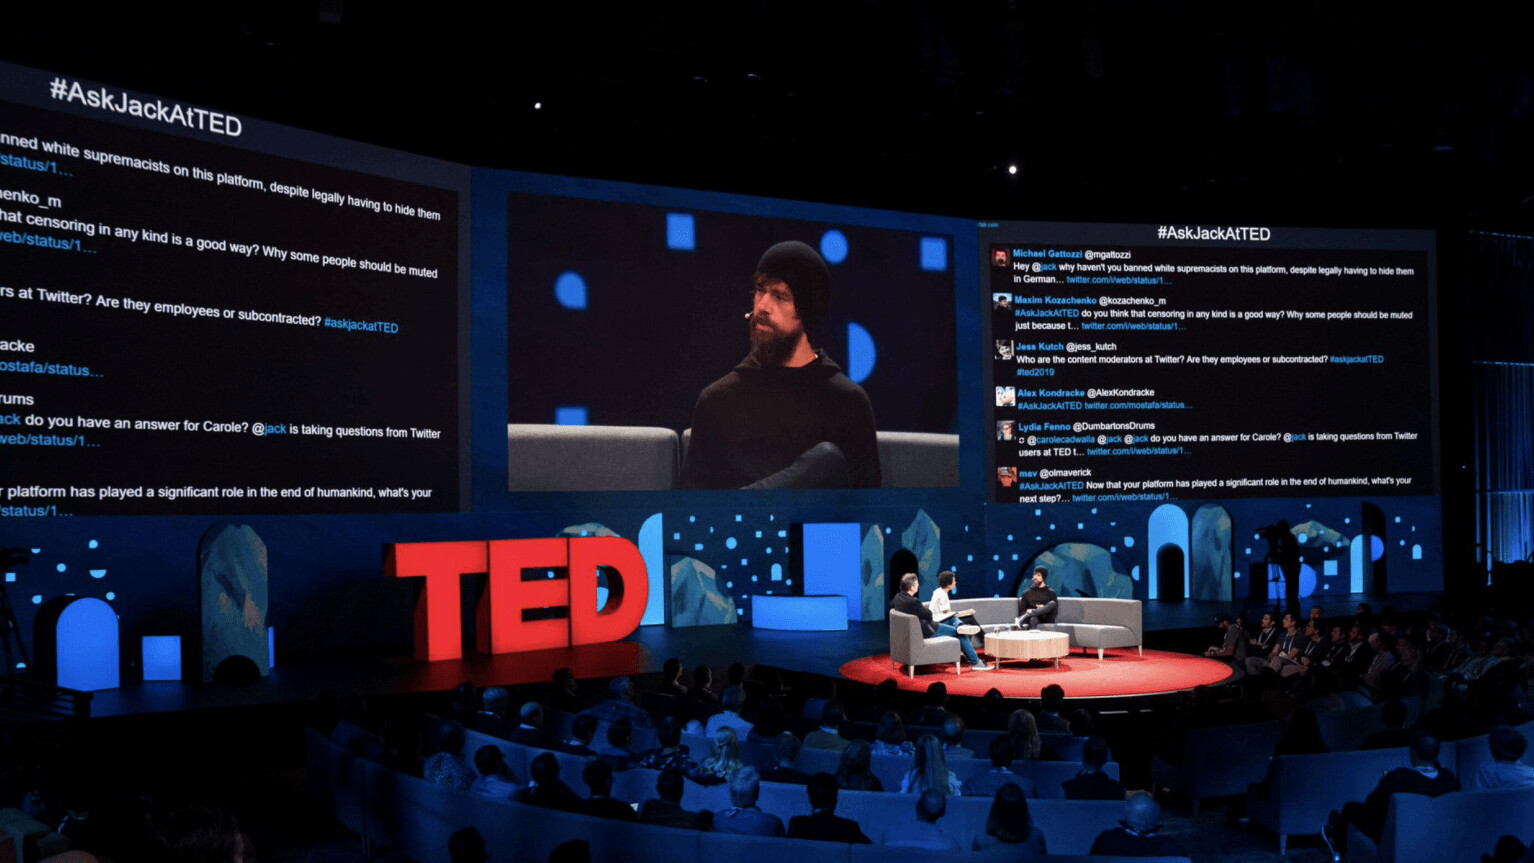 Twitter users trolled Jack Dorsey so hard they had to shut off the screen during his TED Talk [Update]